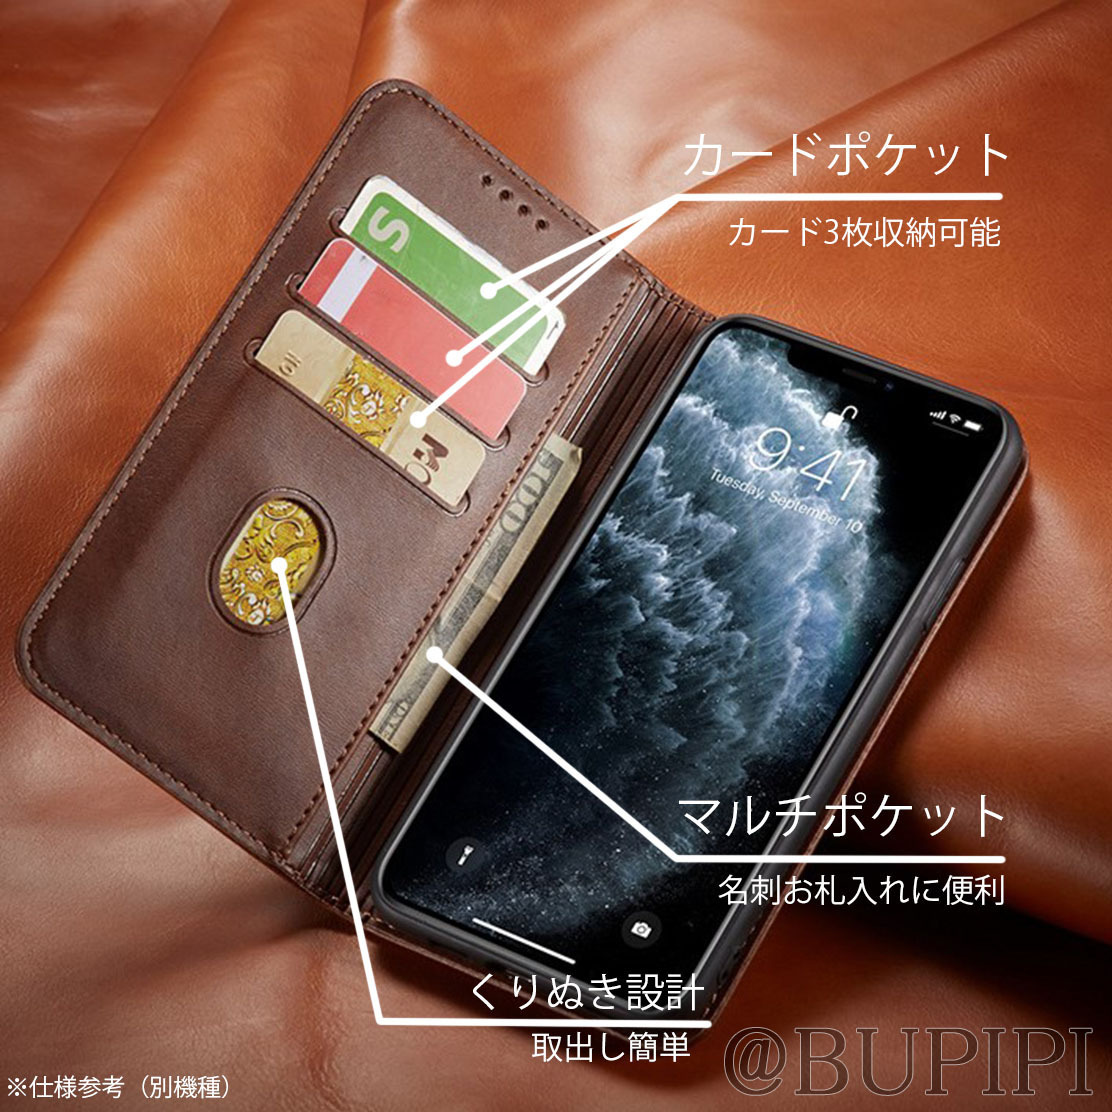  notebook type smartphone case high quality leather iphone X XS correspondence leather style Brown cover recommendation 